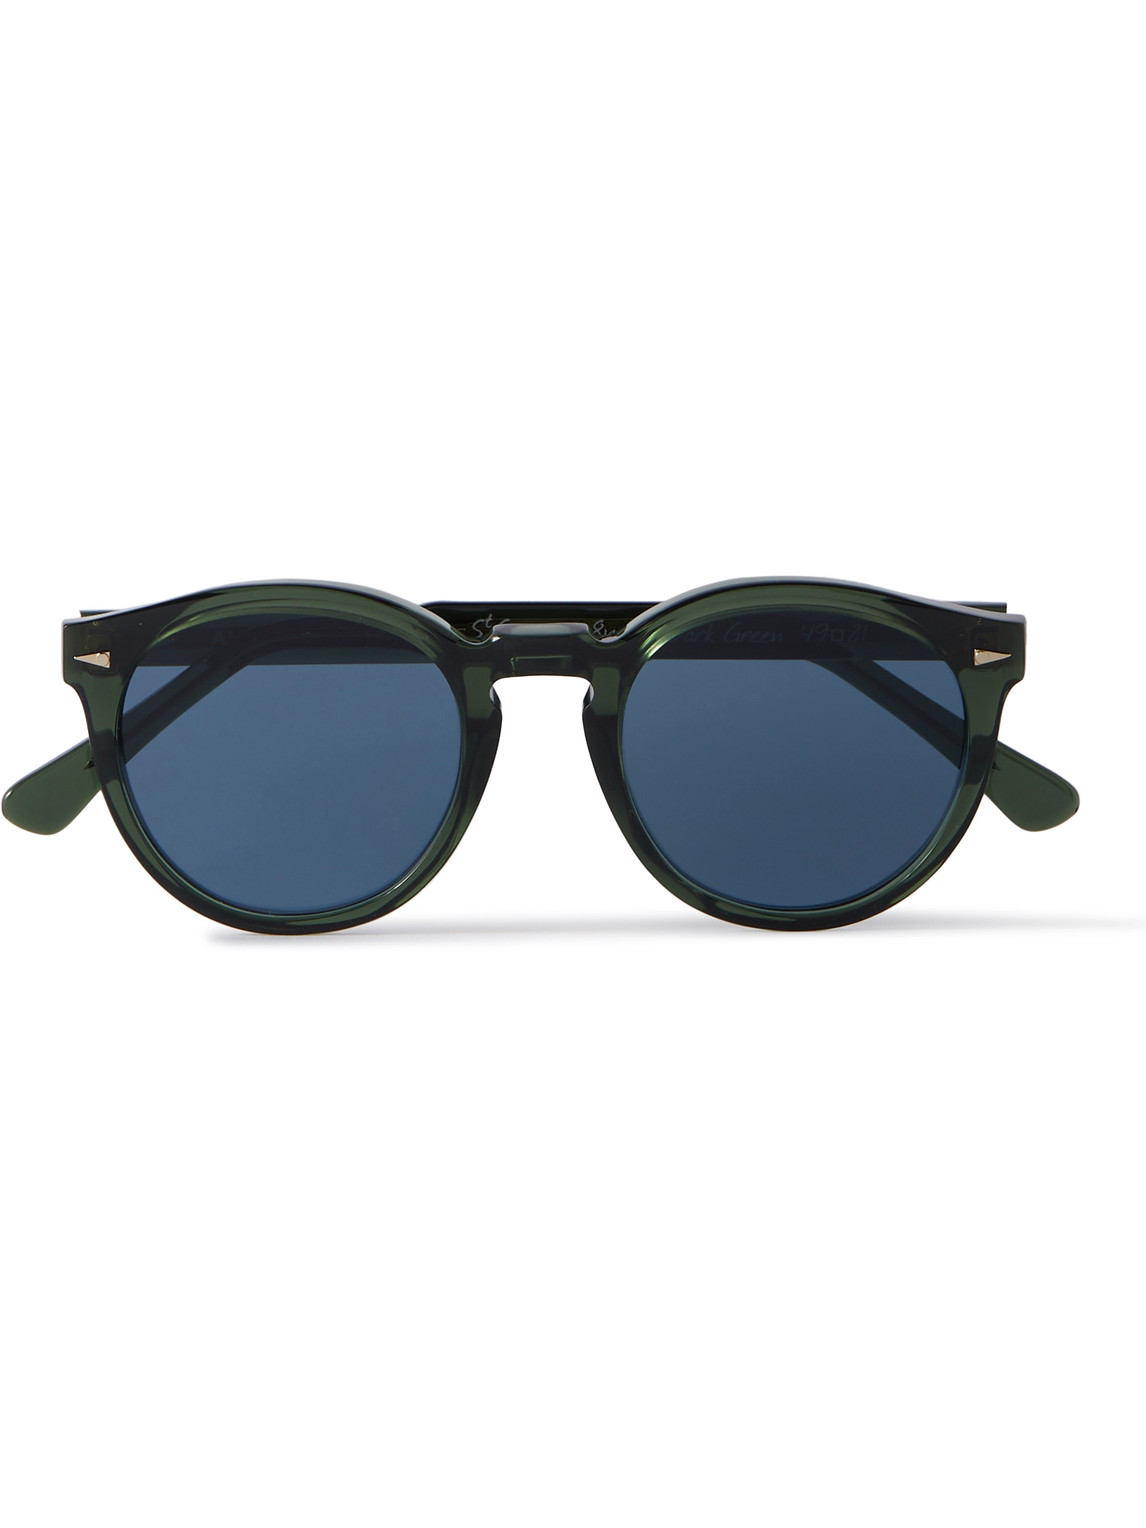 Ahlem St Germain Round-frame Acetate Sunglasses In Green